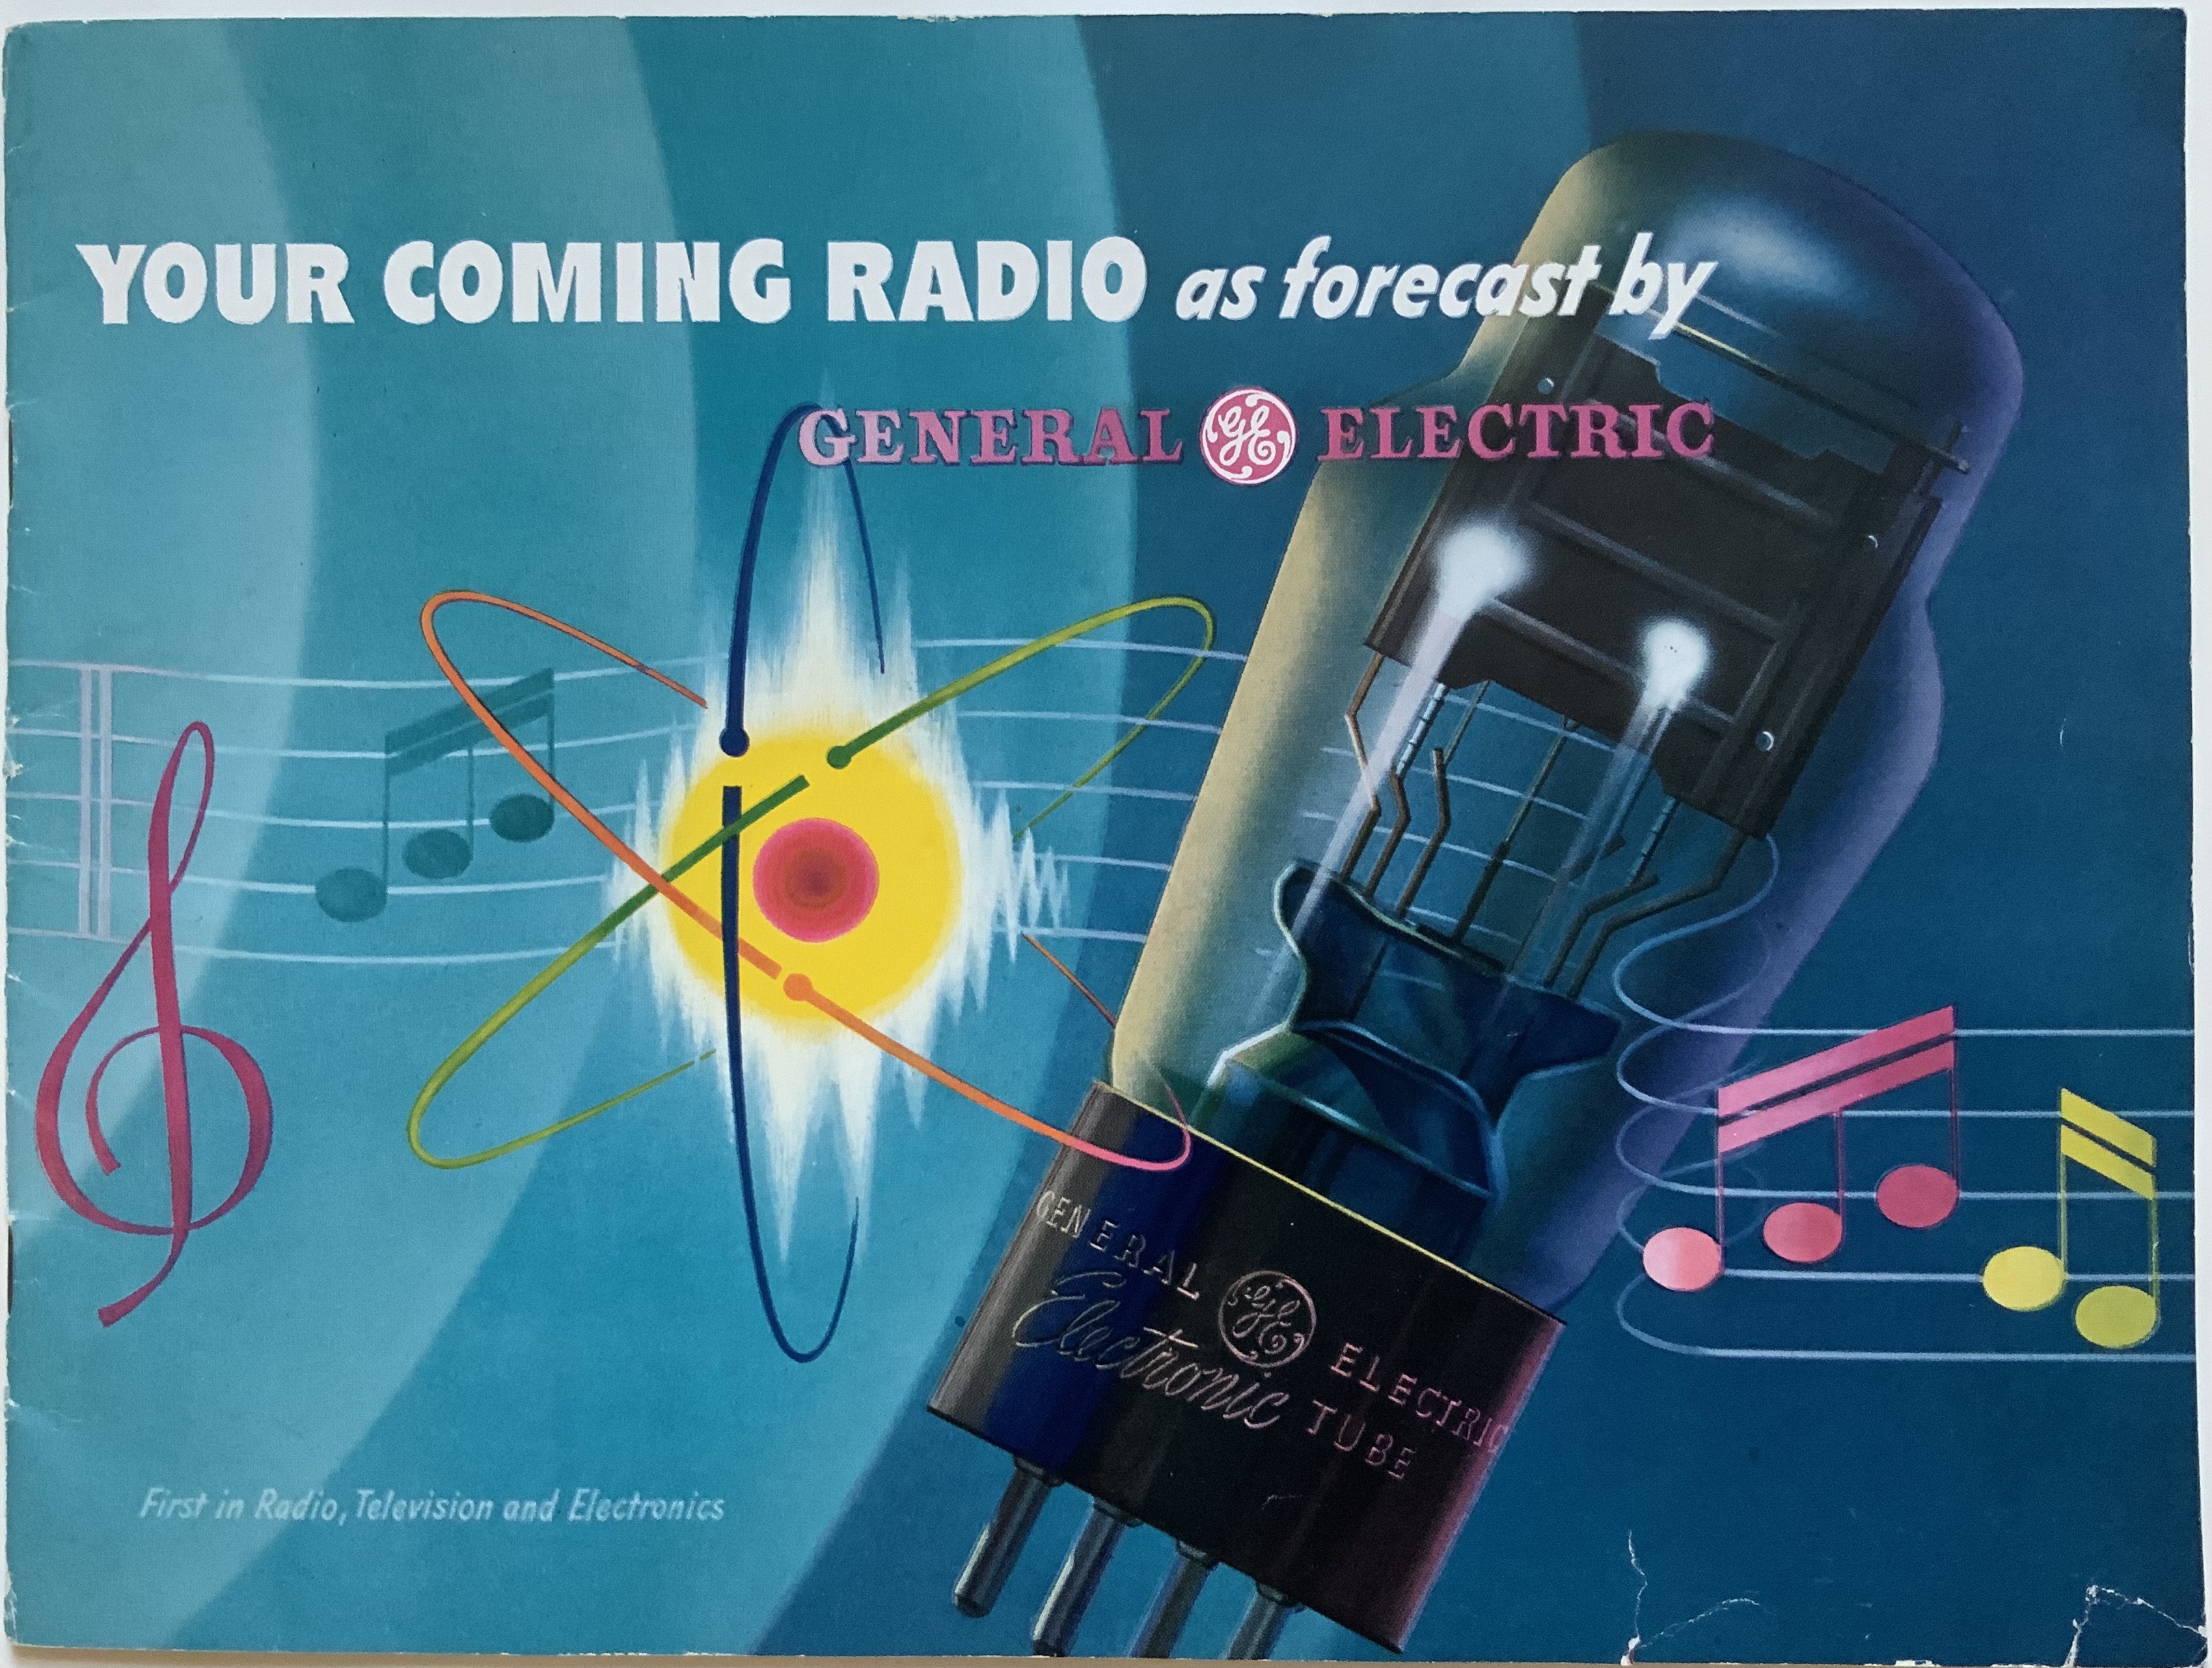 J874	BAYER-LIKE BOOKLET - YOUR COMING RADIO AS FORECAST BY GENERAL ELECTRIC